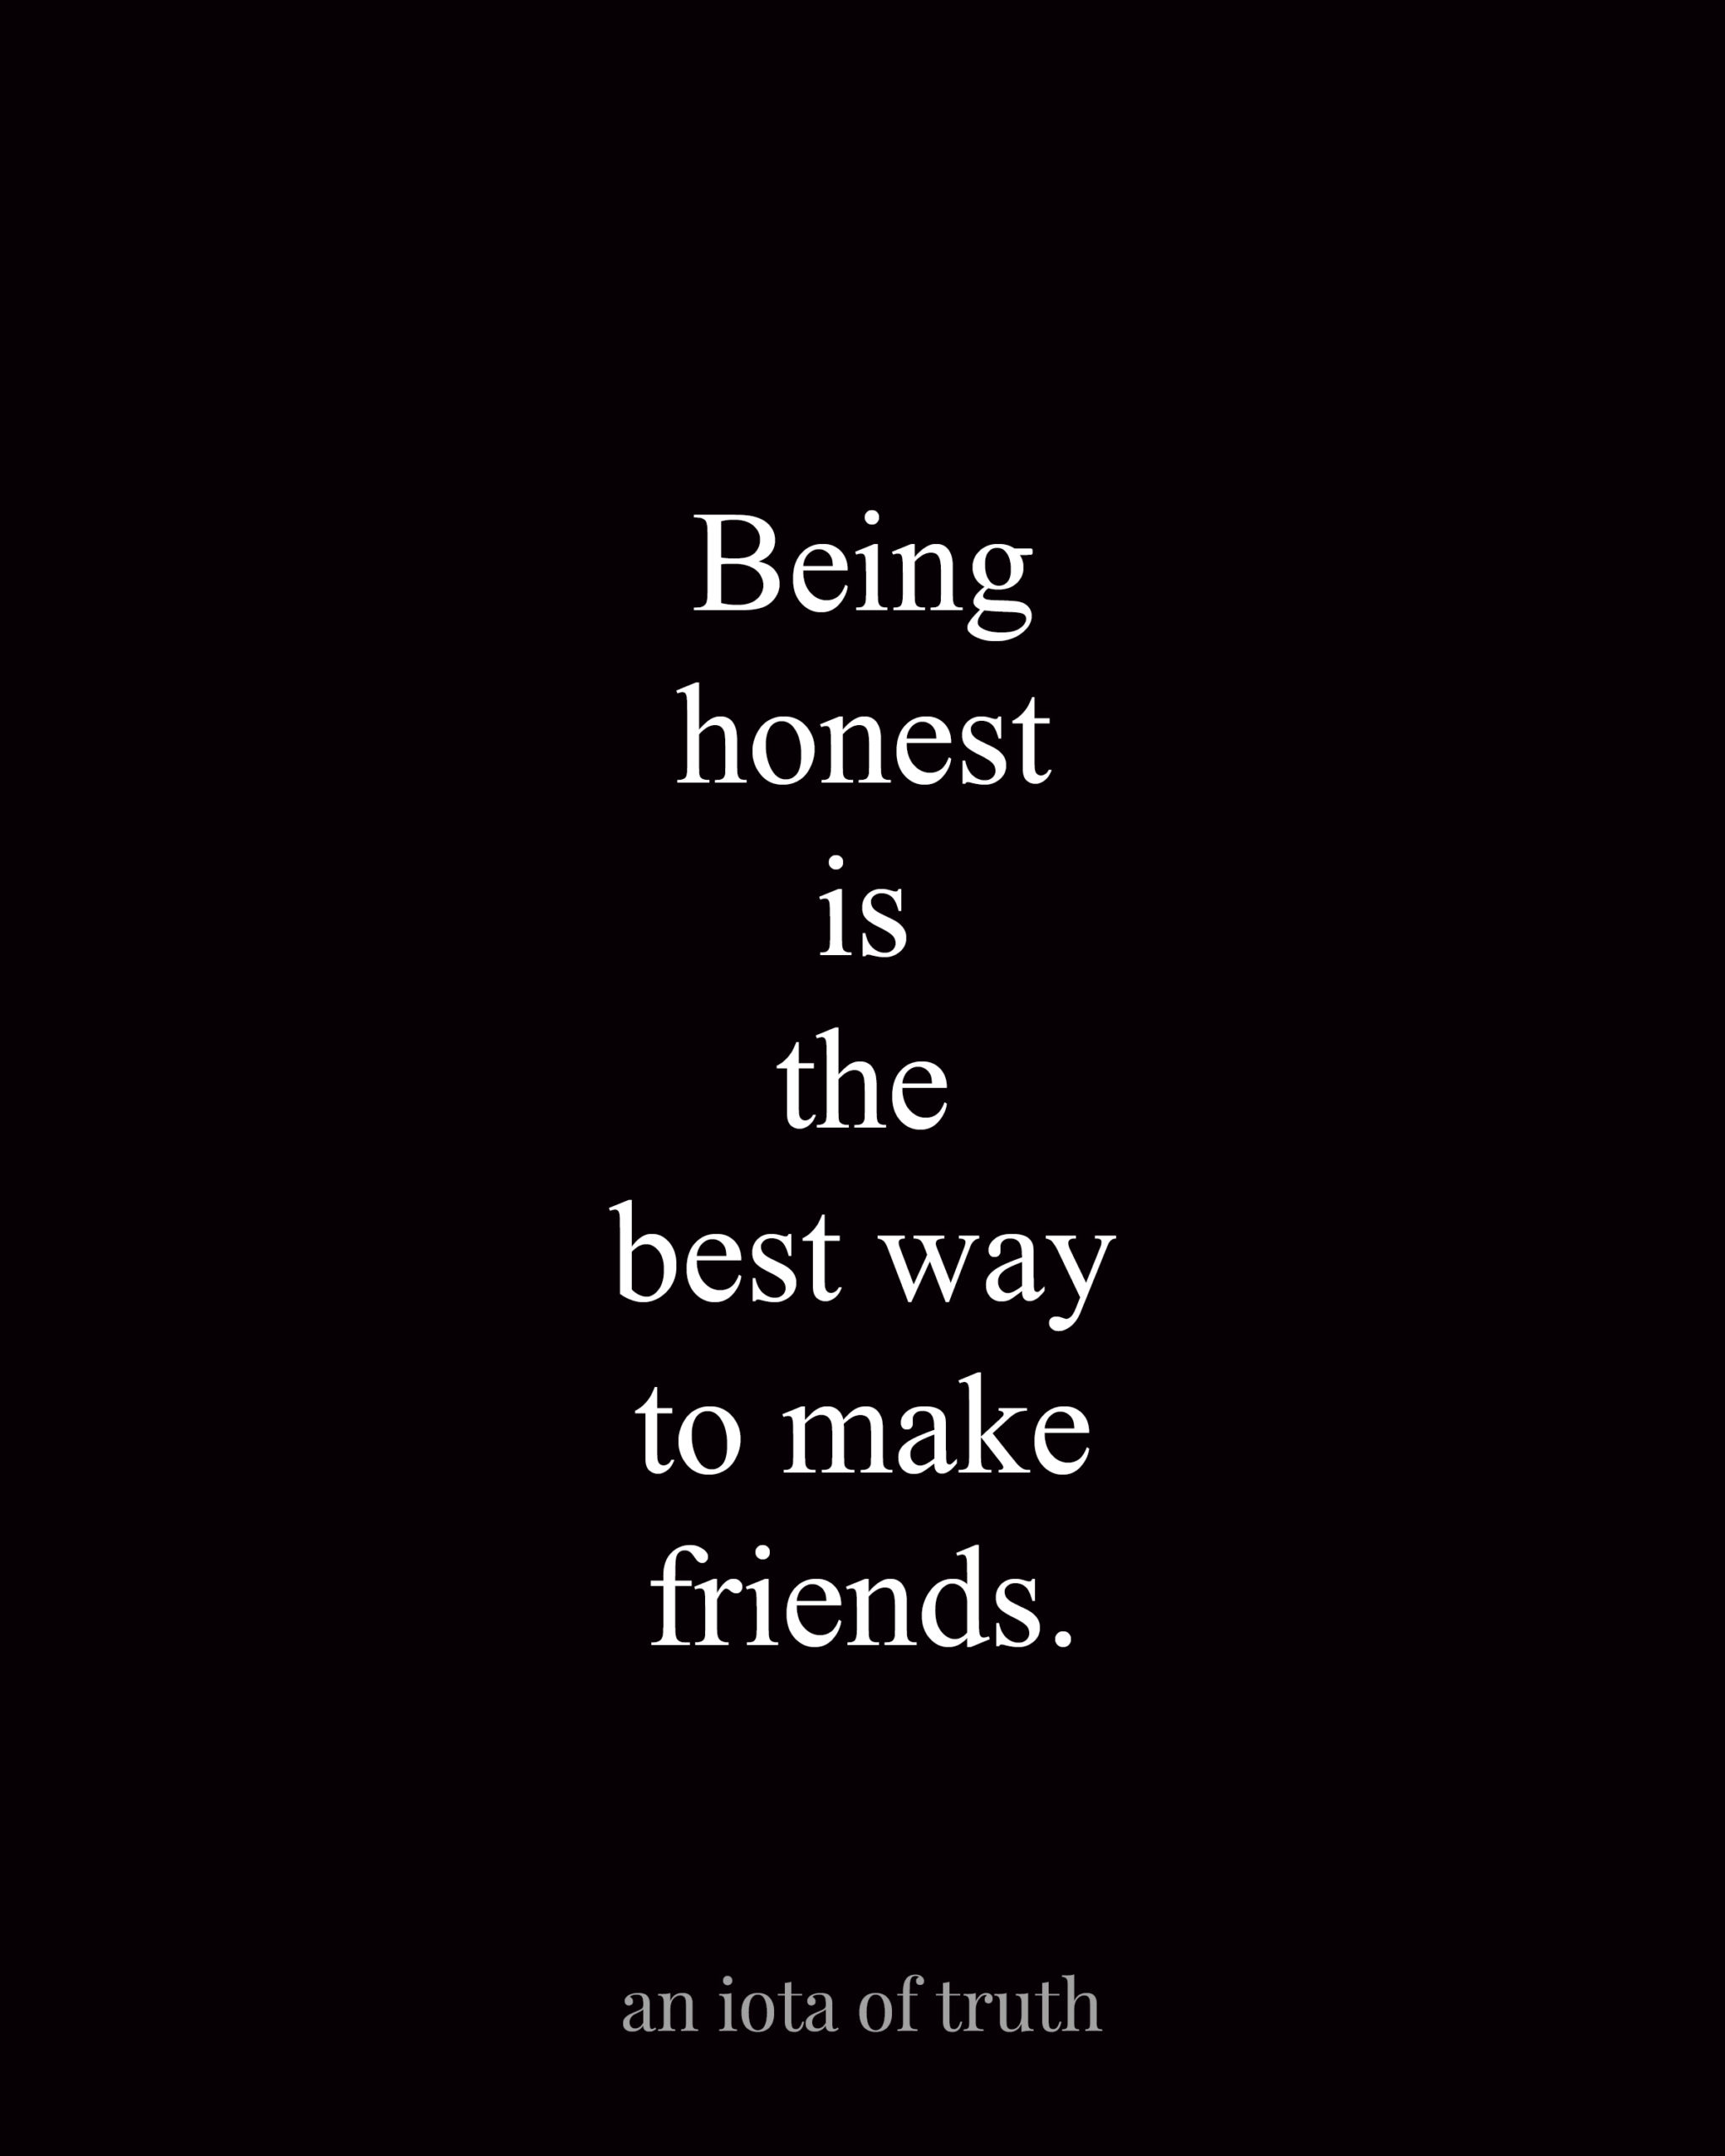 Being honest is the best way to make friends.